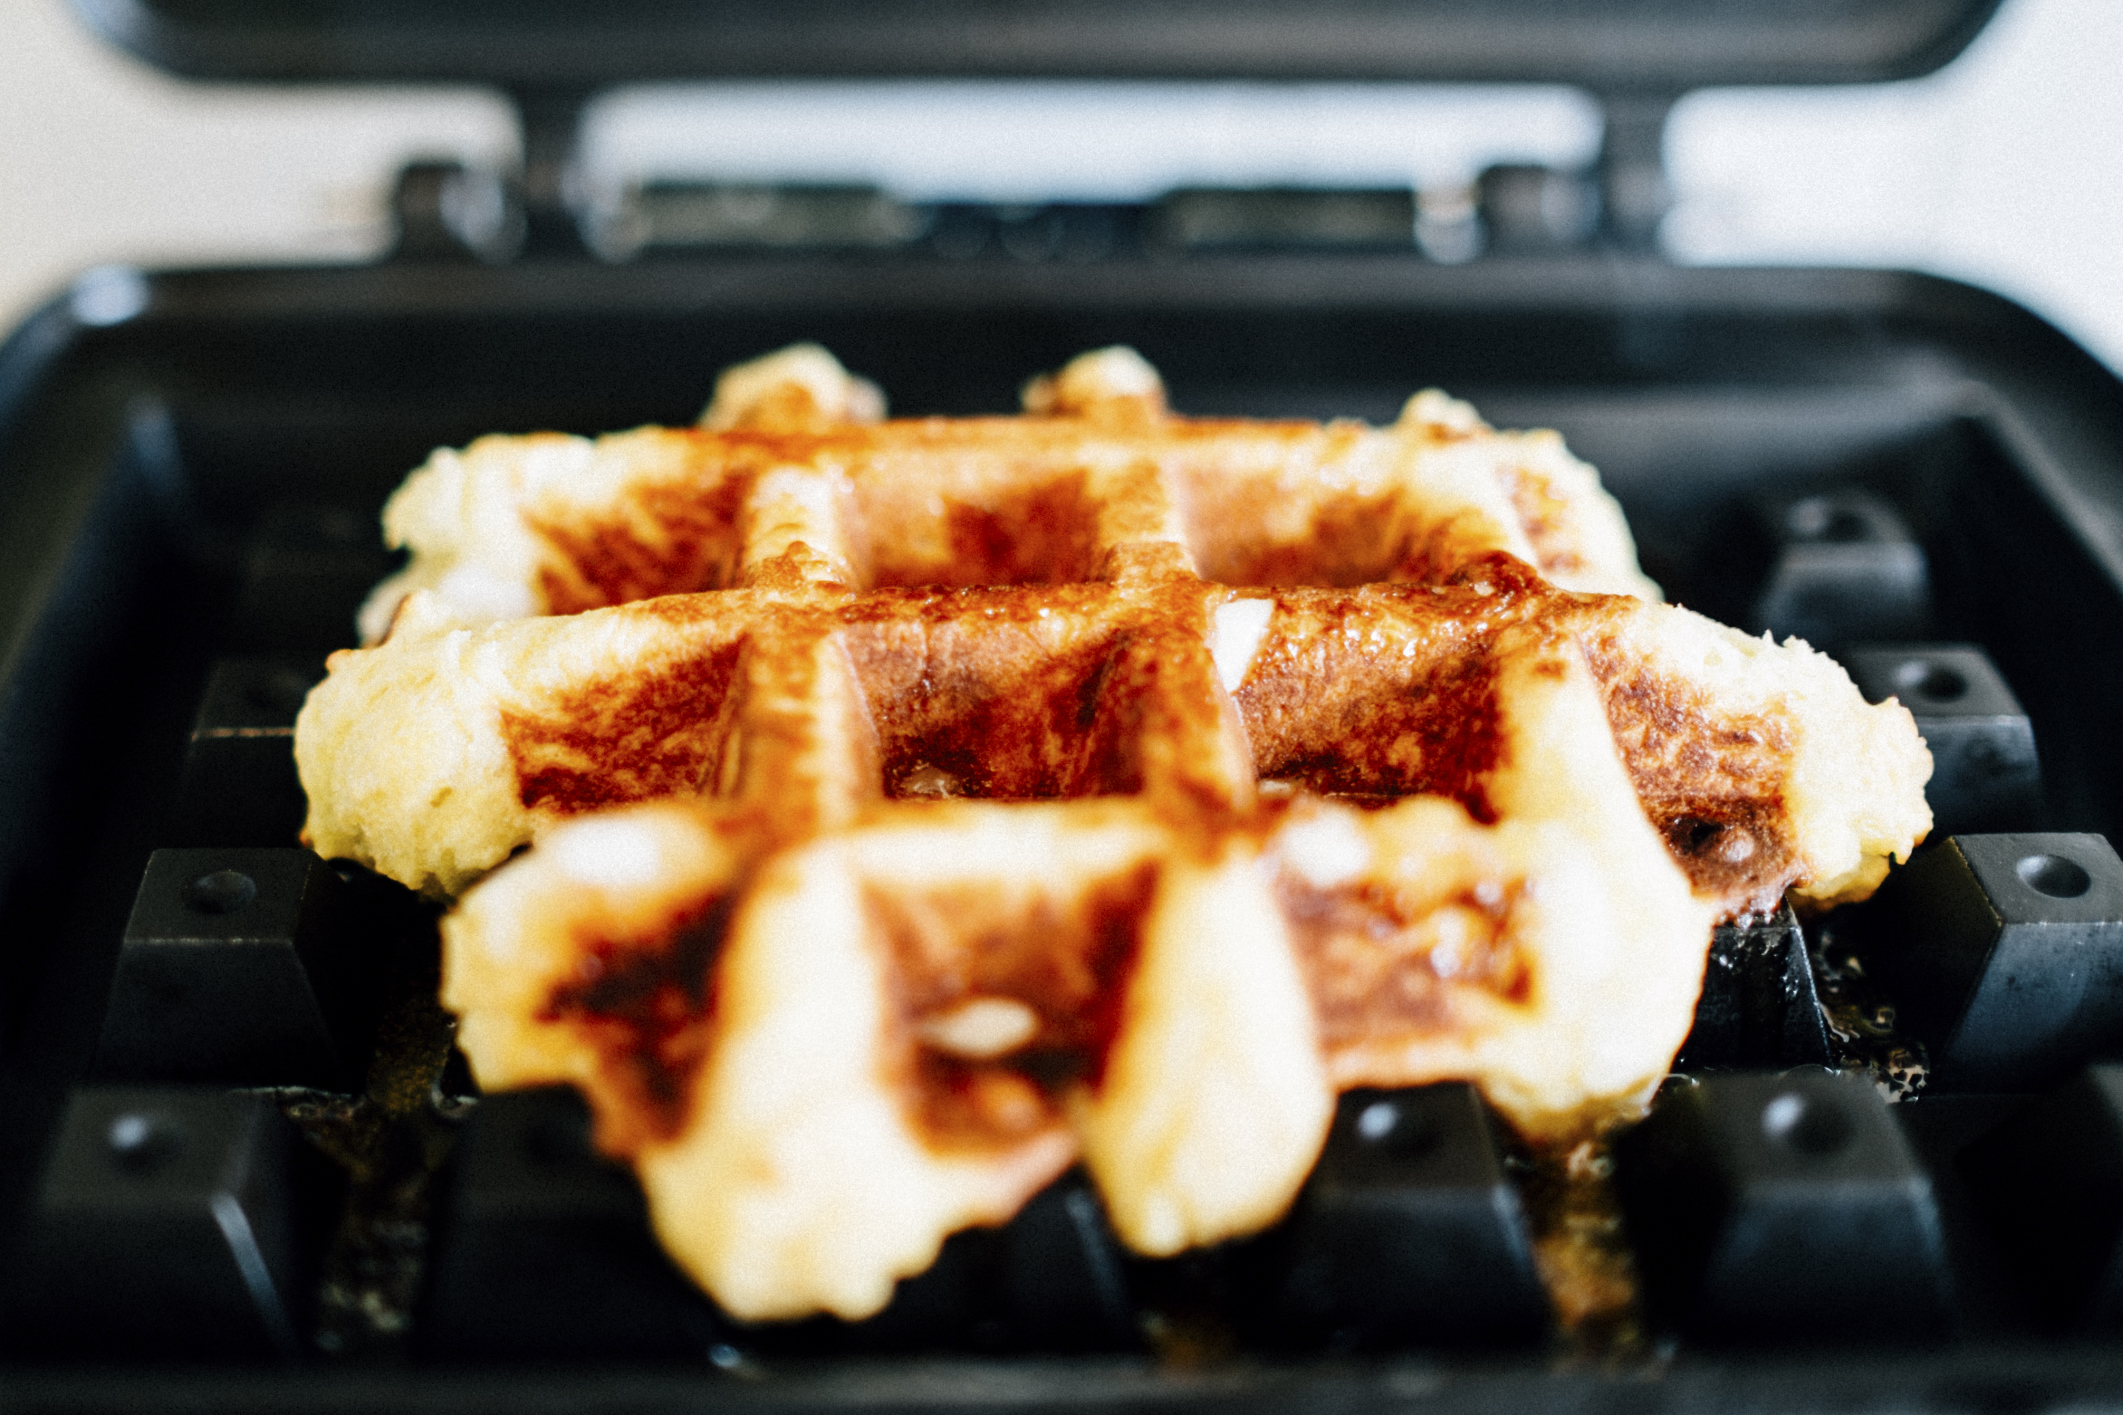 Waffled filet mignon? Writer explores 53 unconventional recipes with waffle iron